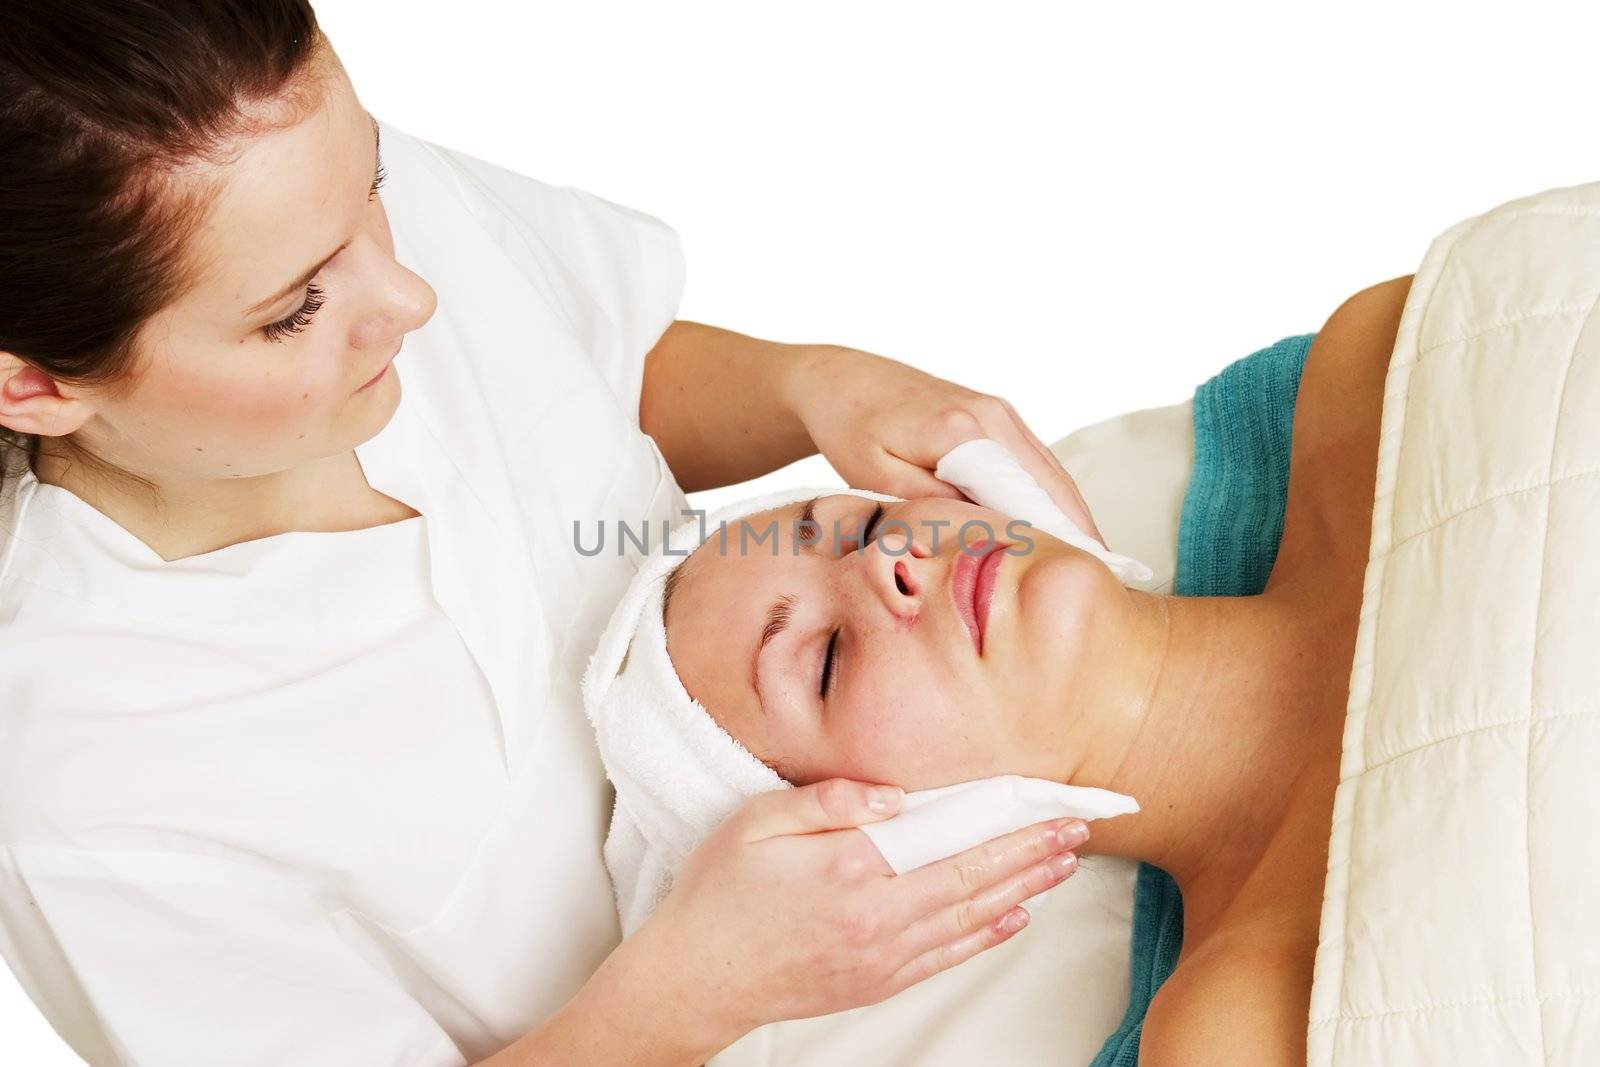 Lotion being massaged into face a beauty spa.